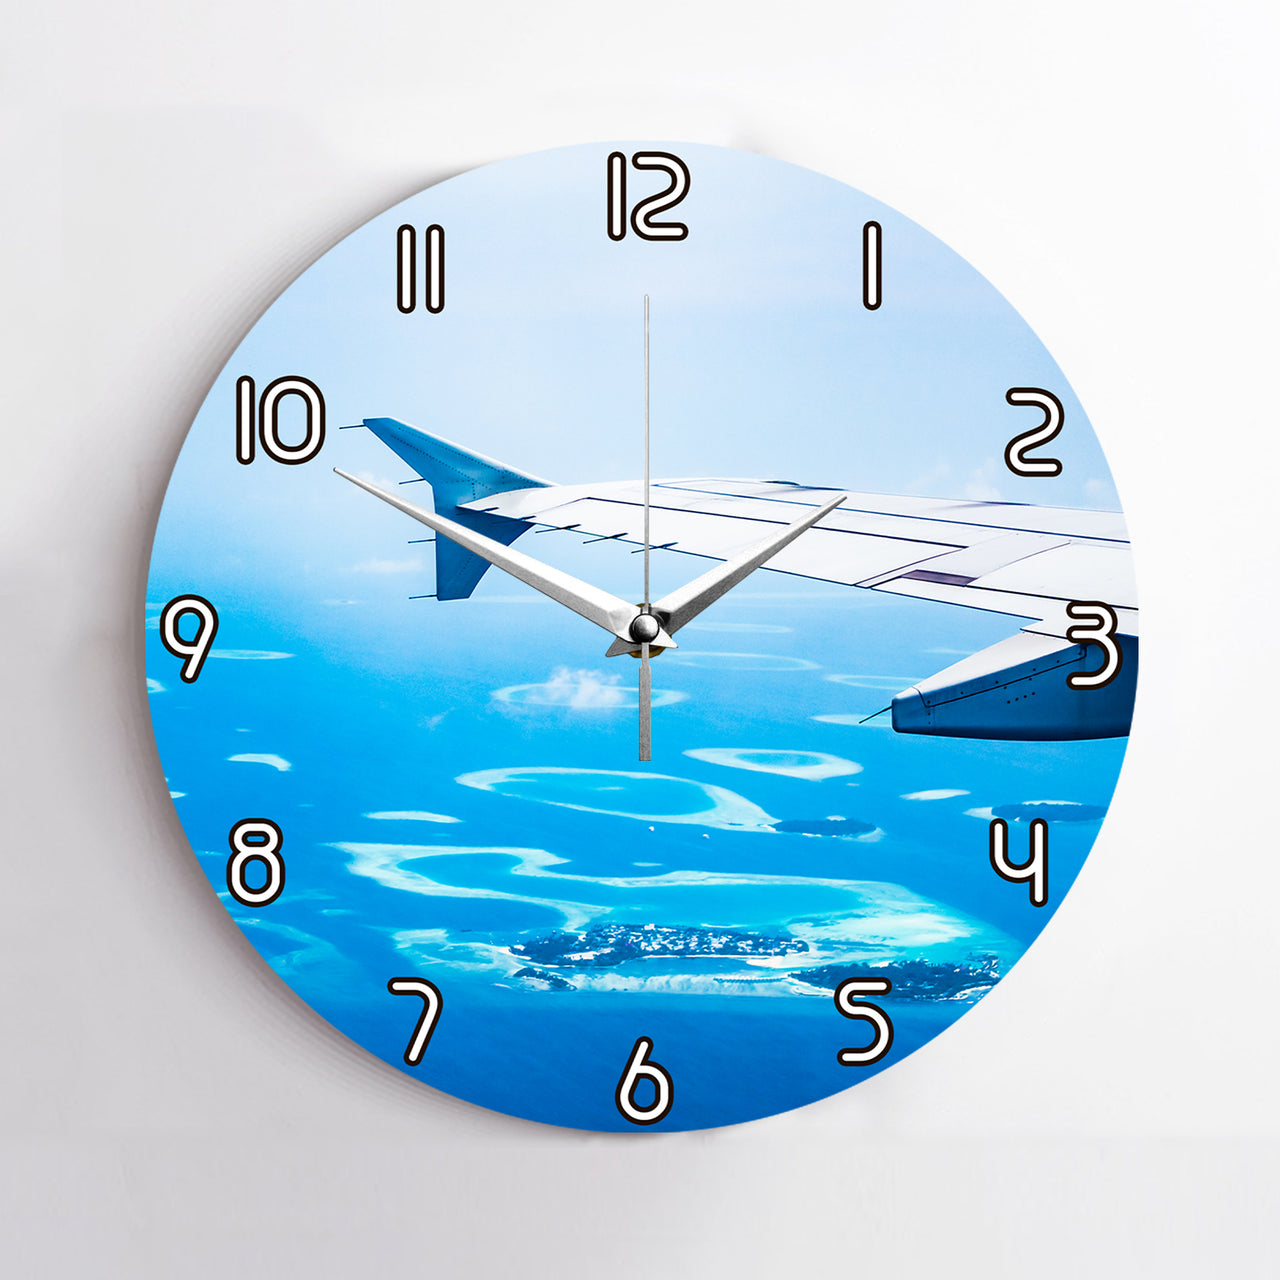 Outstanding View Through Airplane Wing Printed Wall Clocks